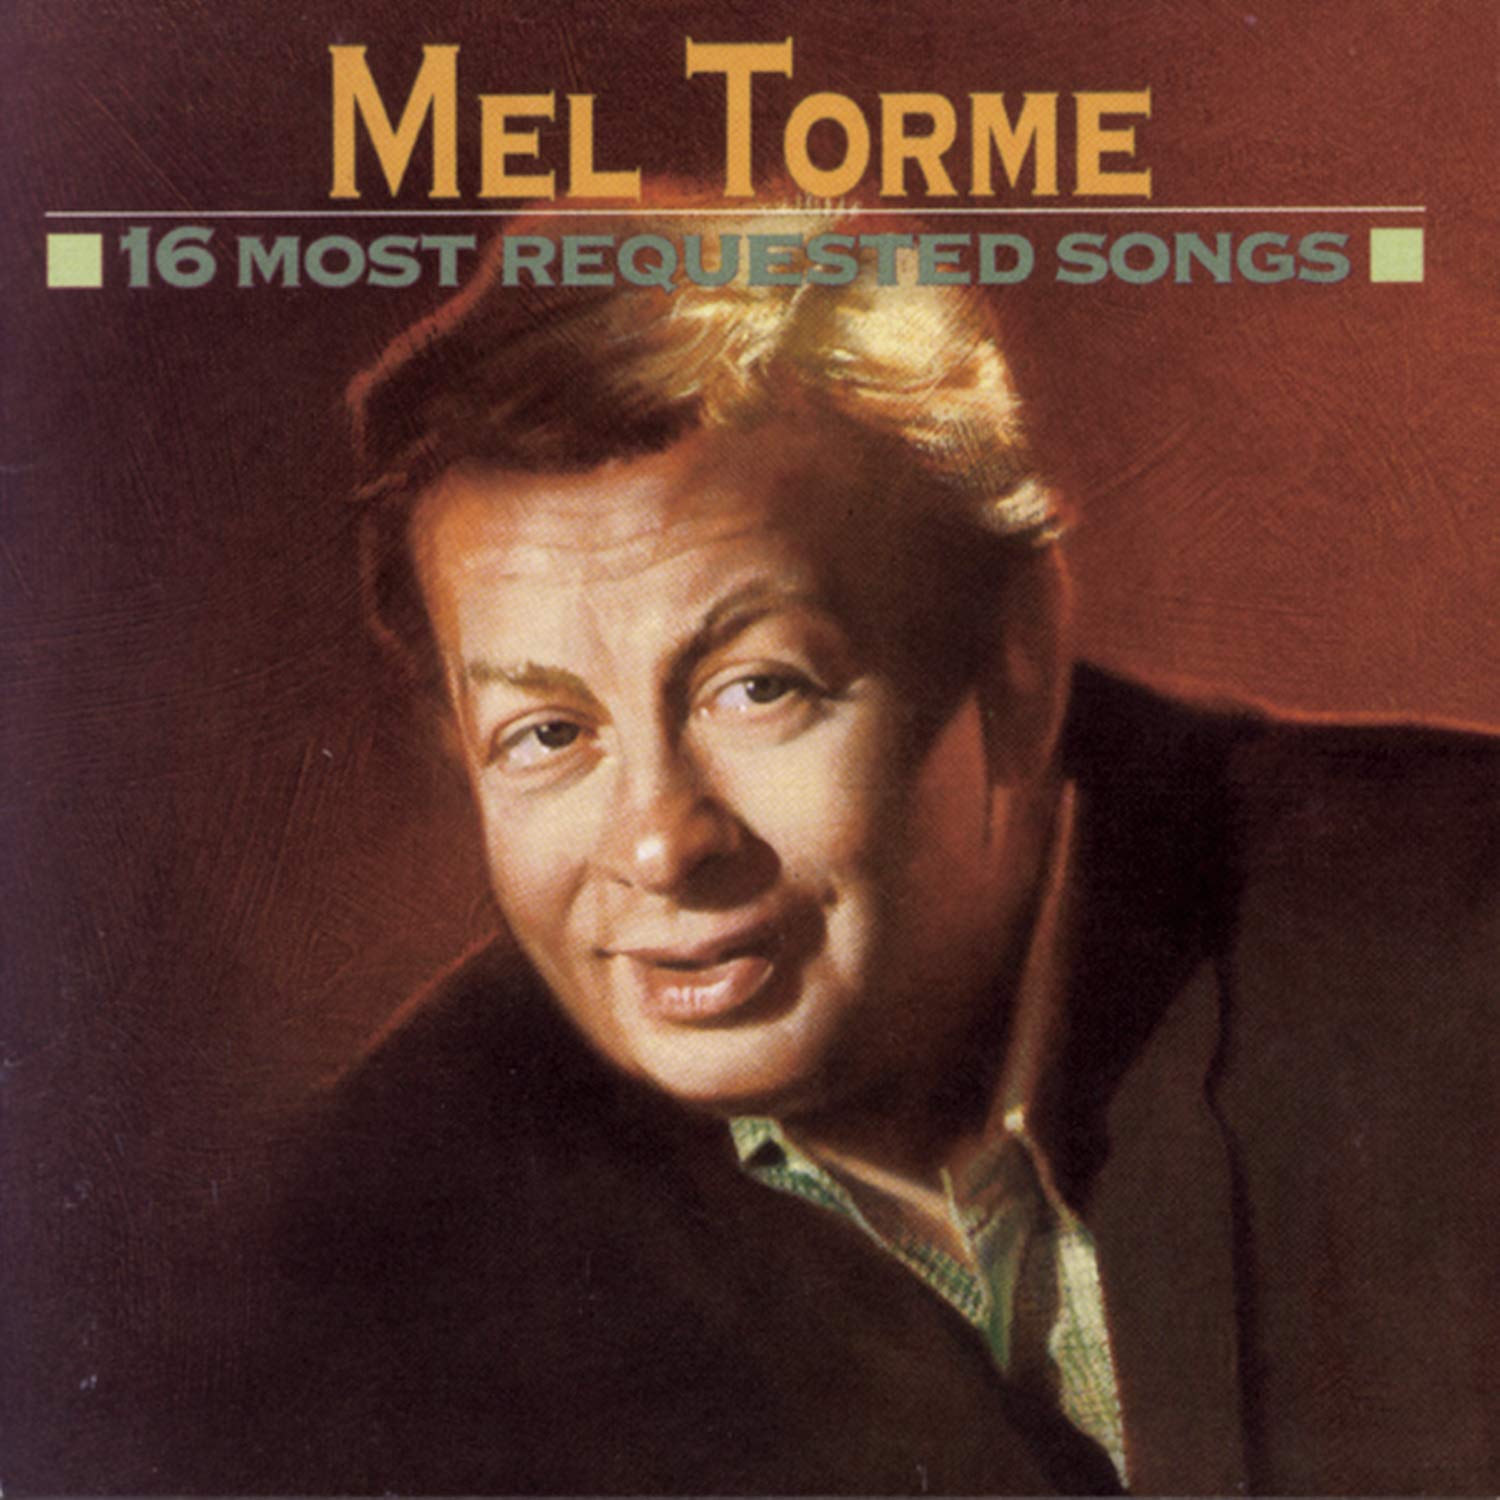 Mel Torme- 16 Most Requested Songs - Darkside Records